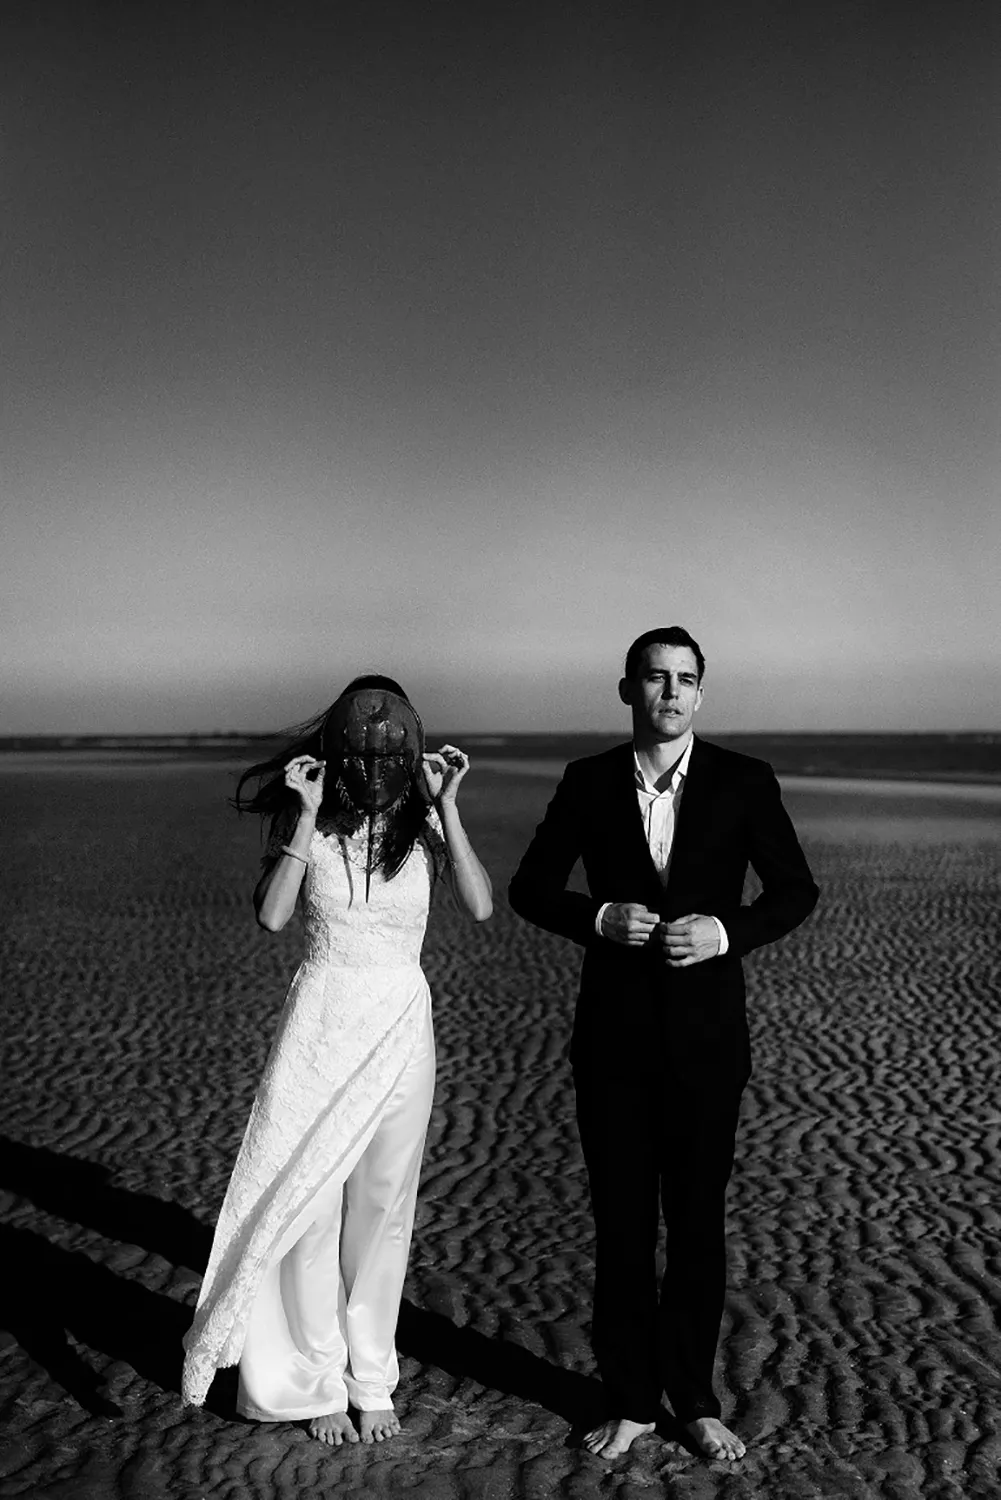 A striking monochrome portrait by Adonye Jaja, celebrated among the Top Wedding Photographers of 2024, features a bride and groom standing apart on a textured sand dune, the bride adjusting her veil and the groom looking pensively ahead.